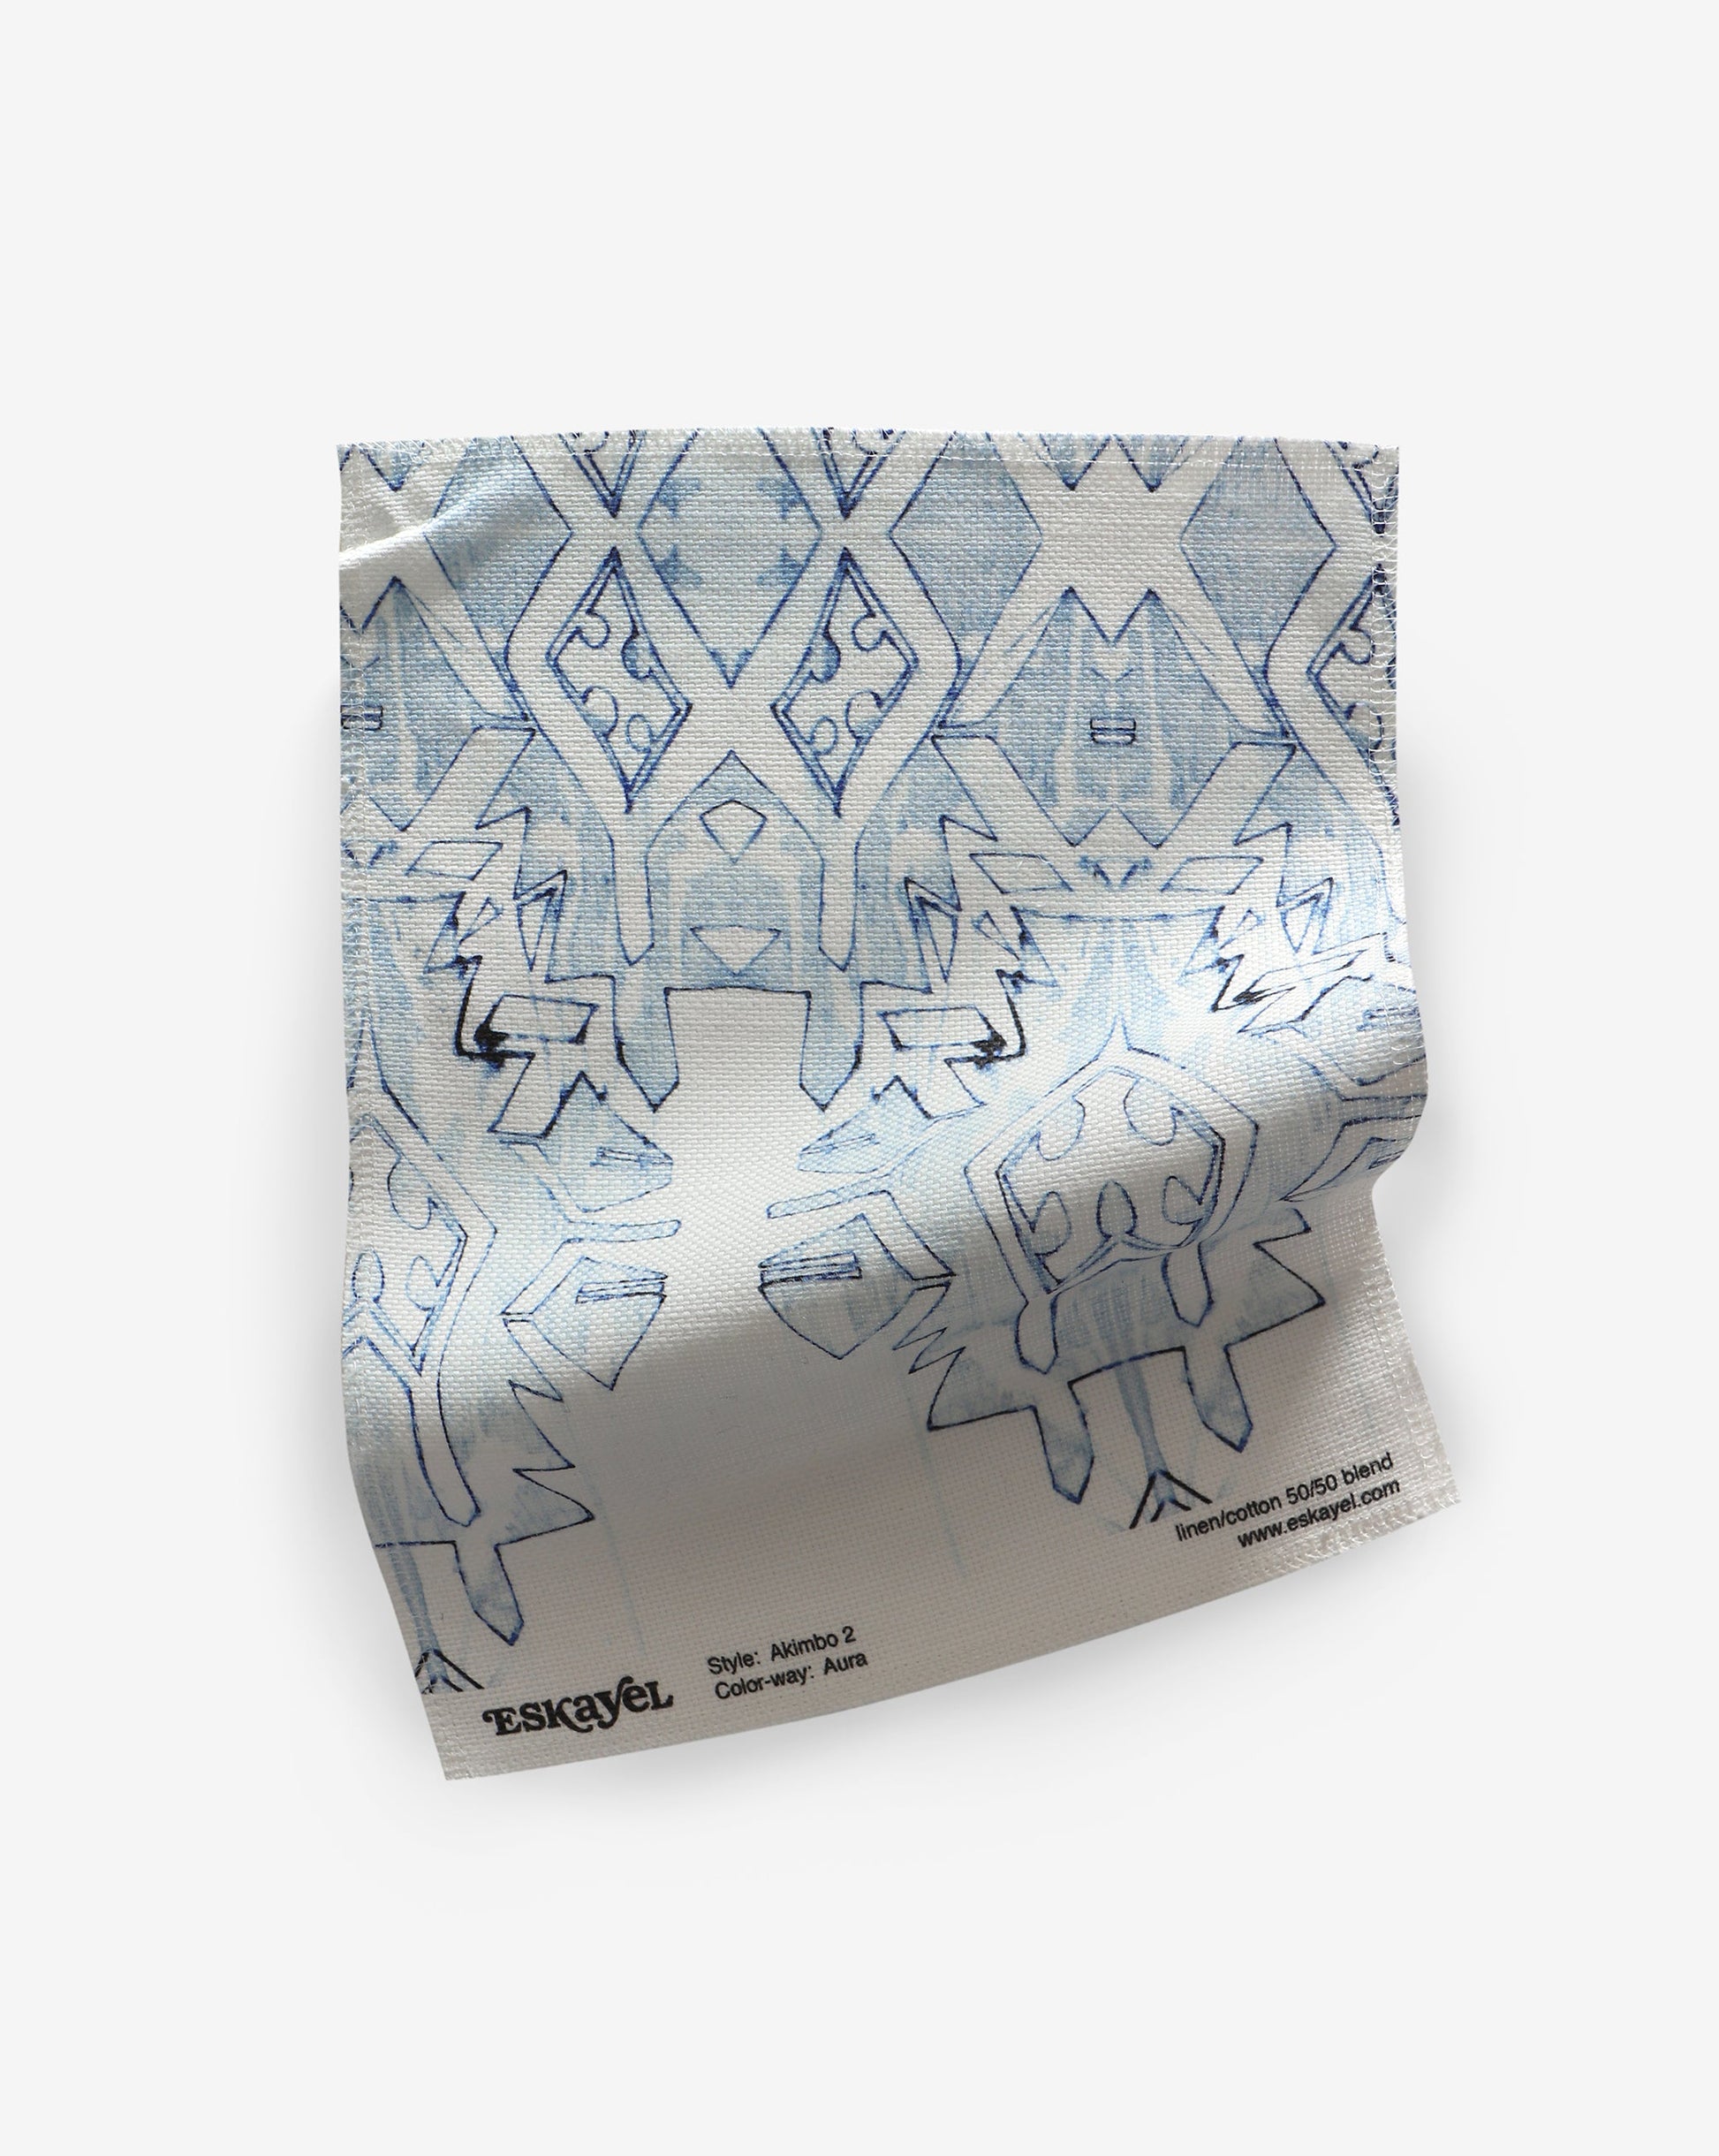 A blue and white Akimbo 2 Fabric with a geometric pattern on it.